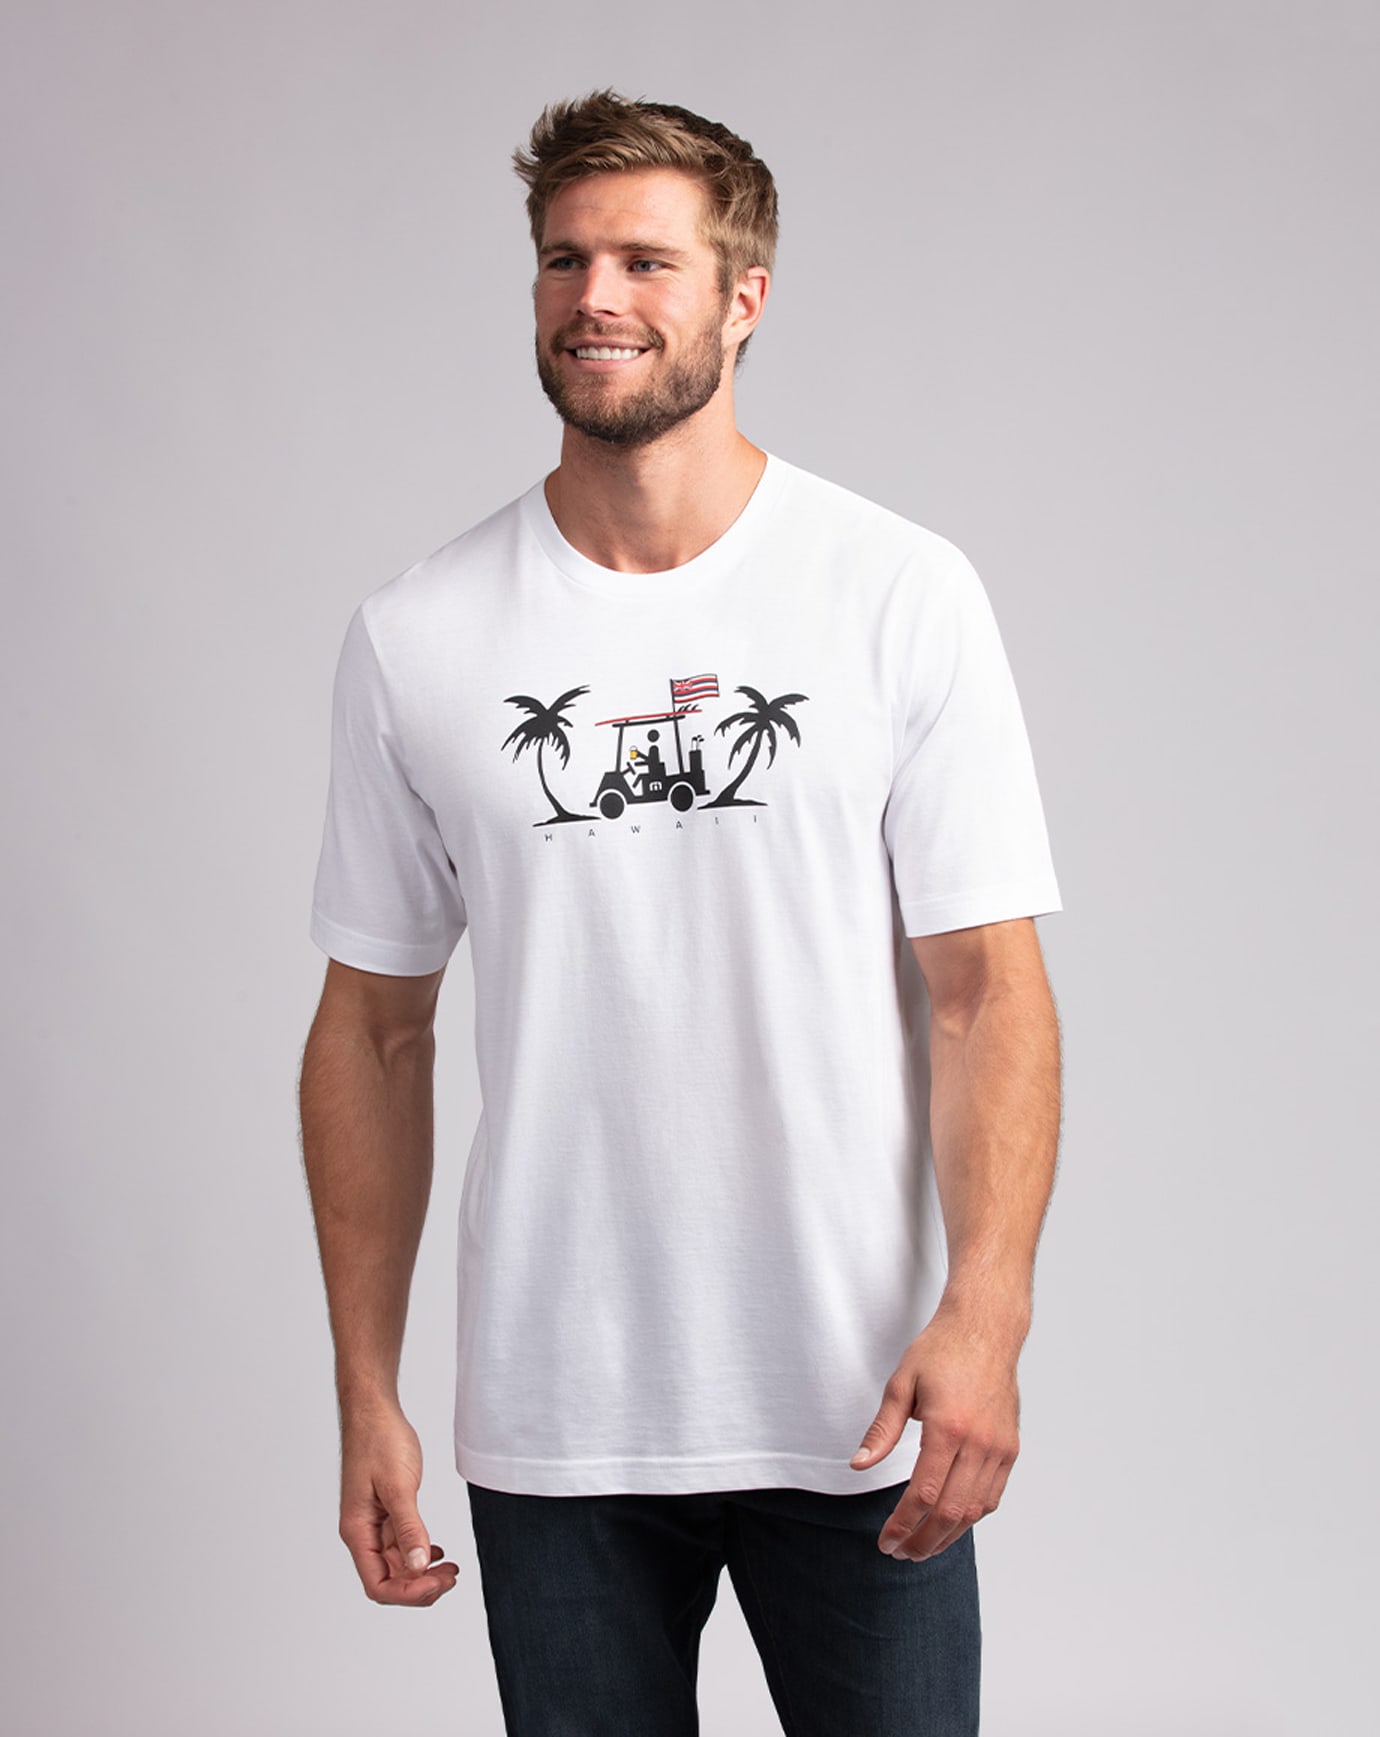 Related Product - PIPELINE DREAMS TEE